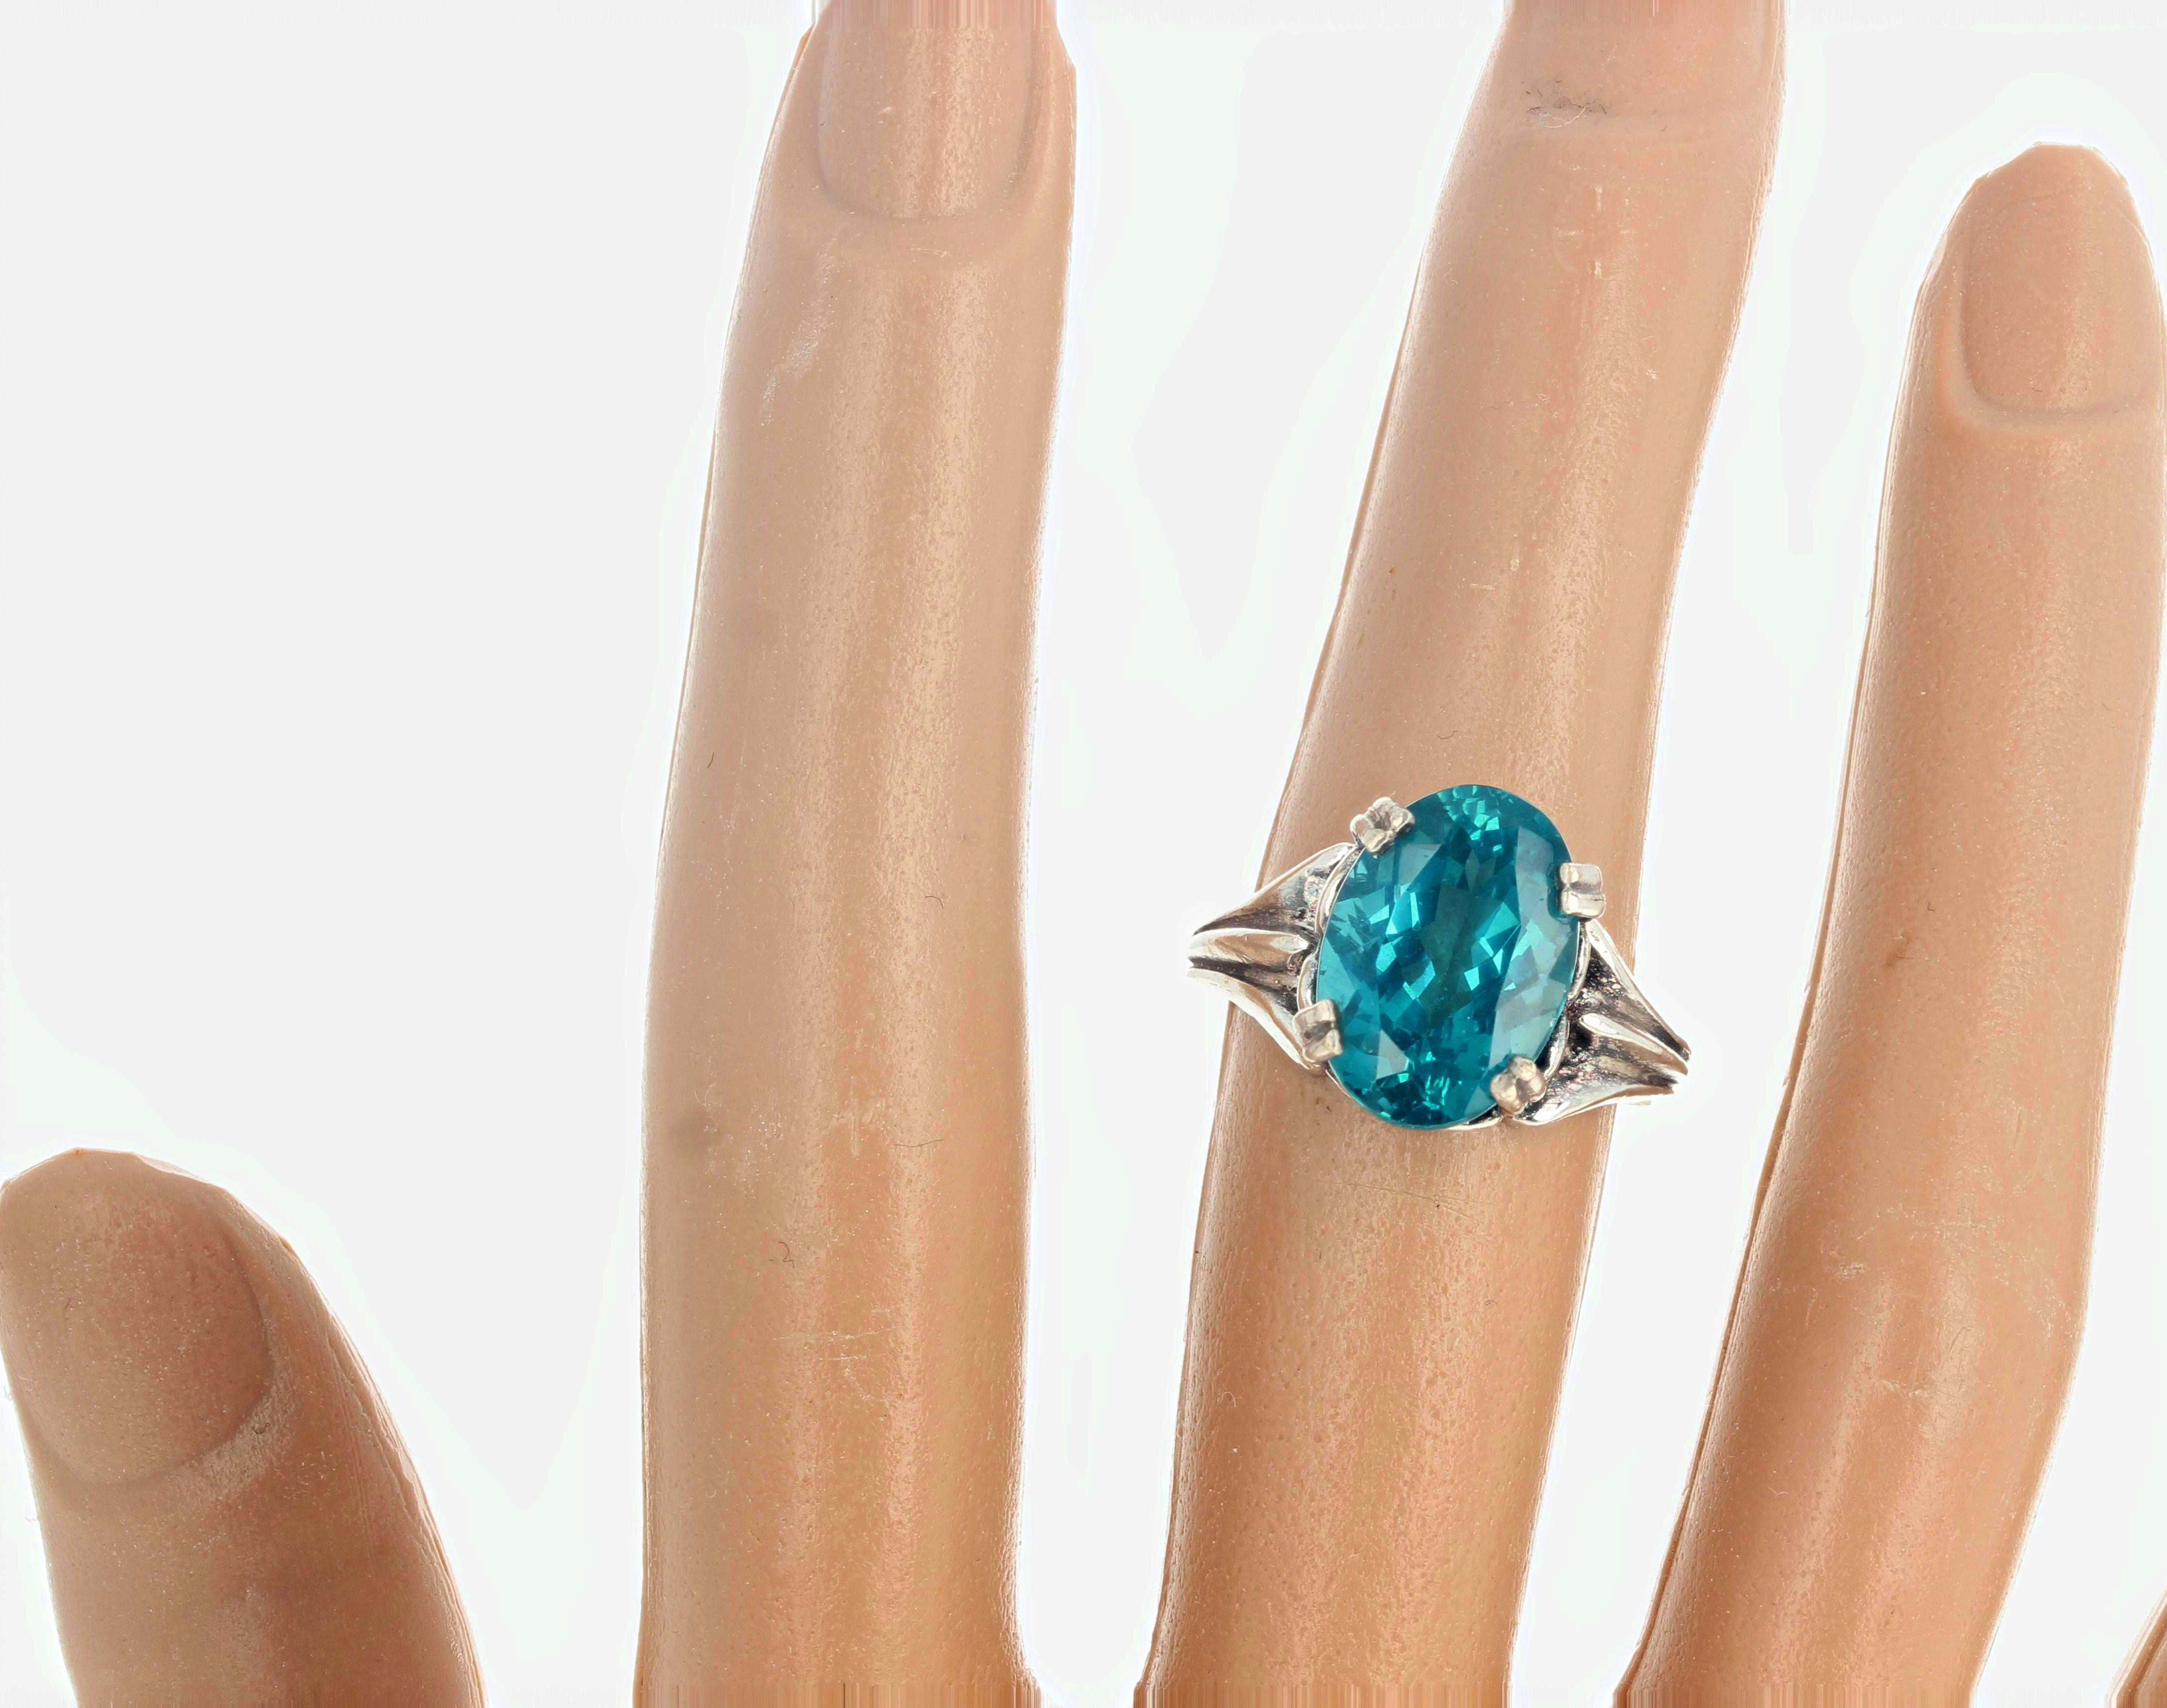 This stunning fiery turquoise blue color 5.7 carat natural Apatite is 14mm x 10mm and sparkles intensely in this classic solitaire sterling silver ring size 7 (sizable for free).  This gemstone and its intense color come from the famous mine of